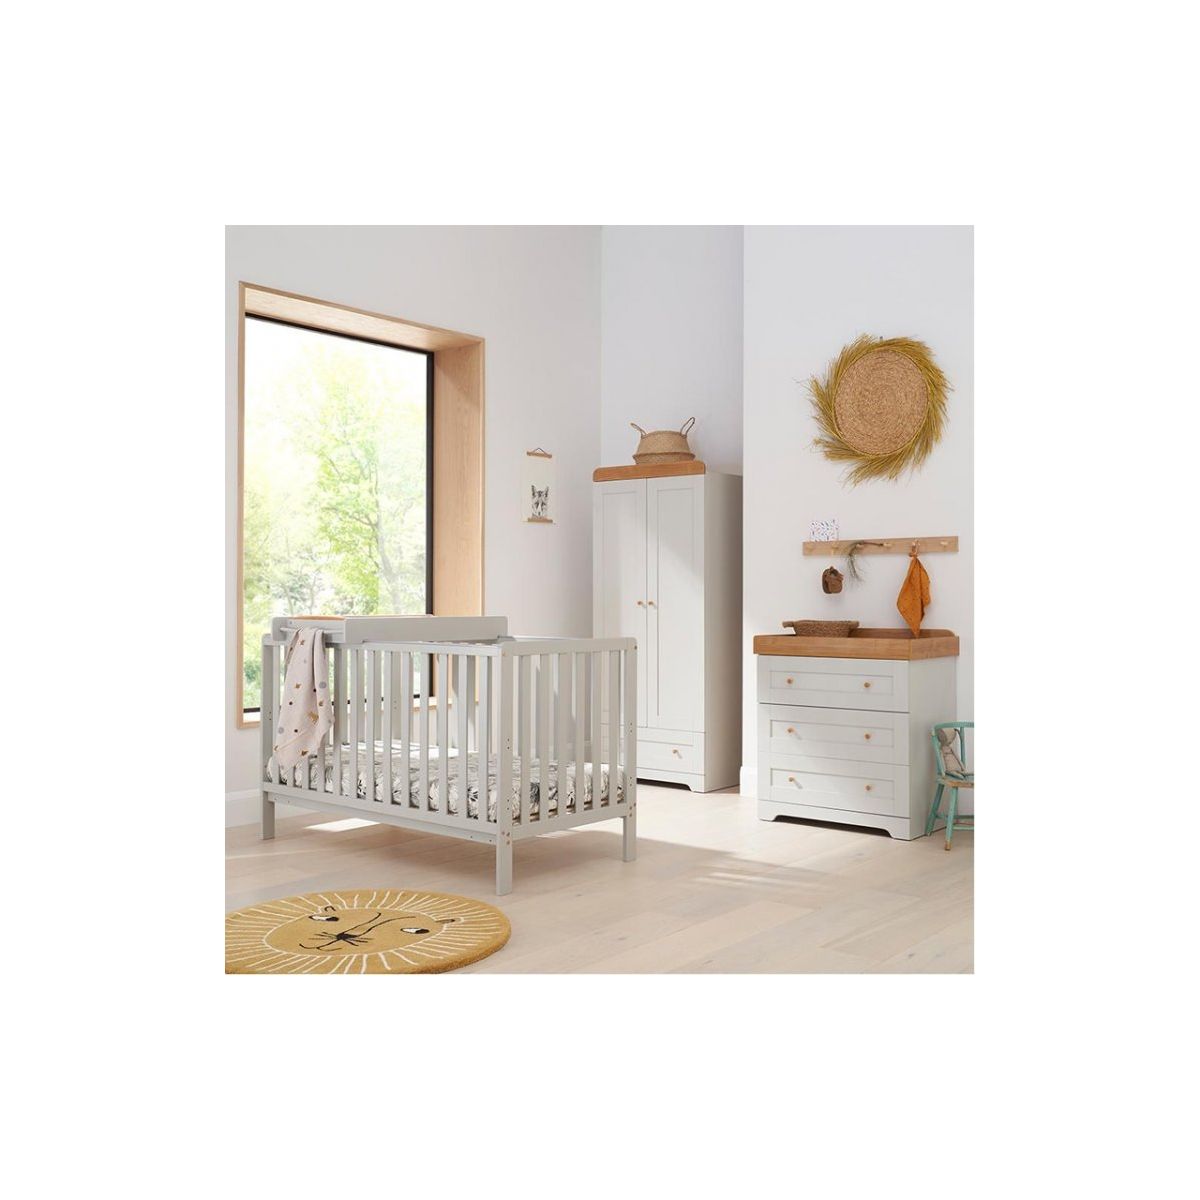 Tutti Bambini Malmo 3 Piece Room Set with Cot Top Changer